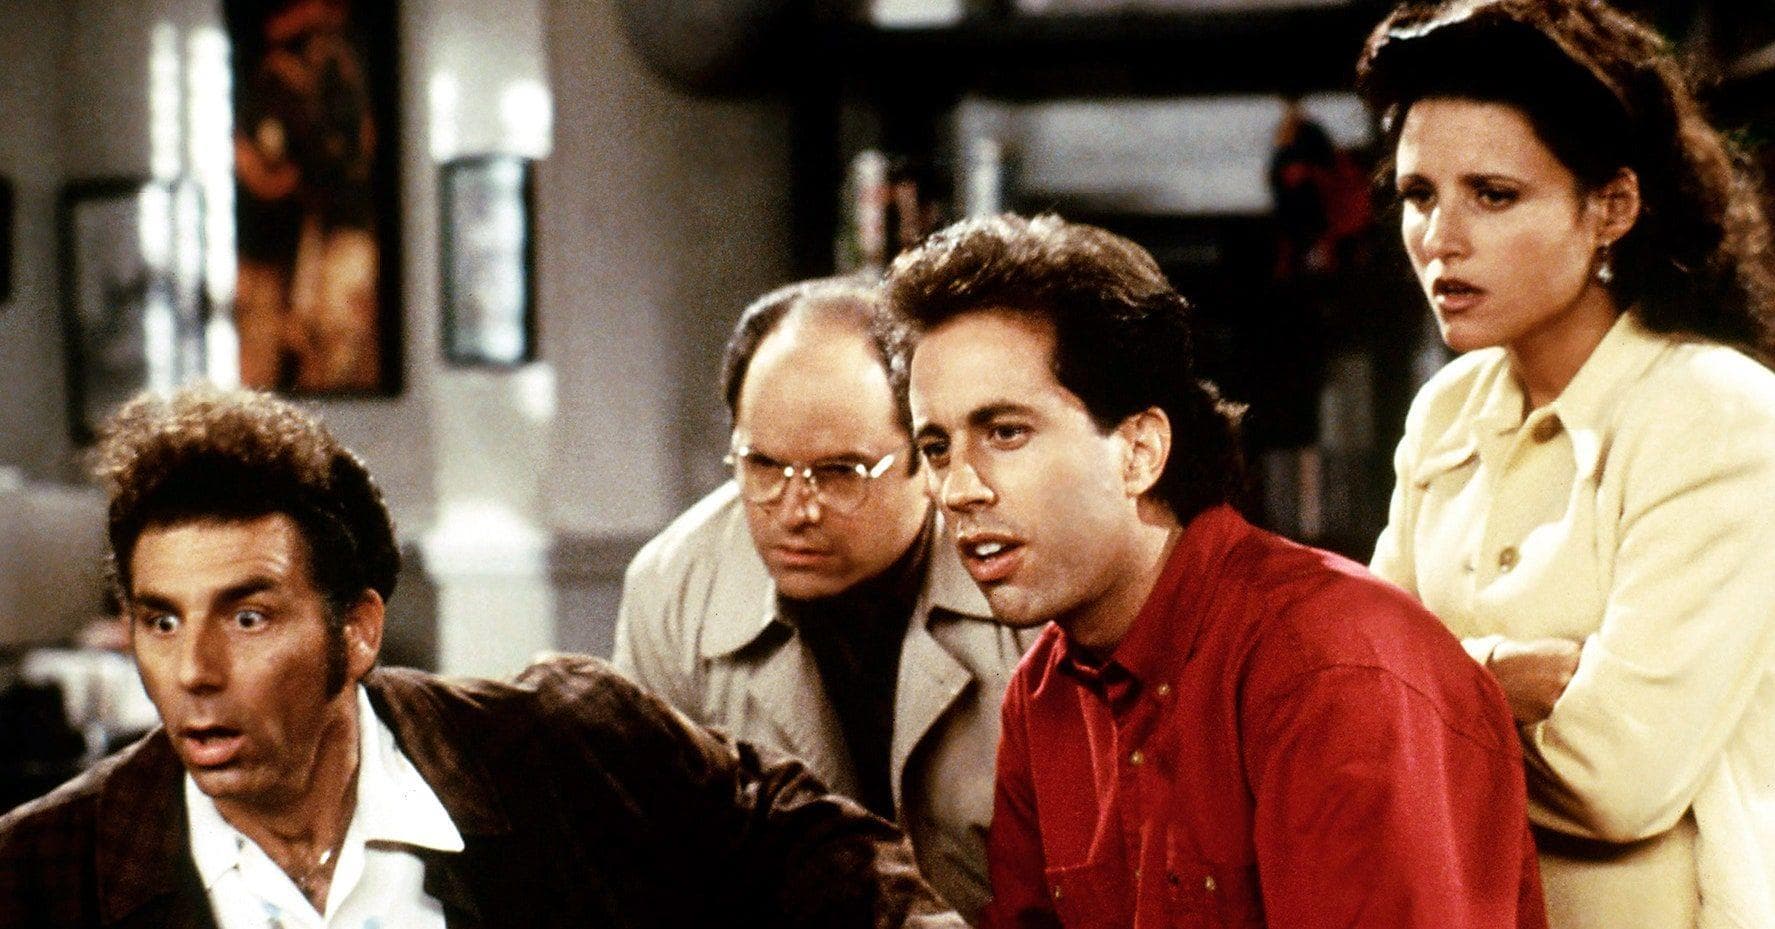 14 Dark Stories From Behind The Scenes Of 'Seinfeld'